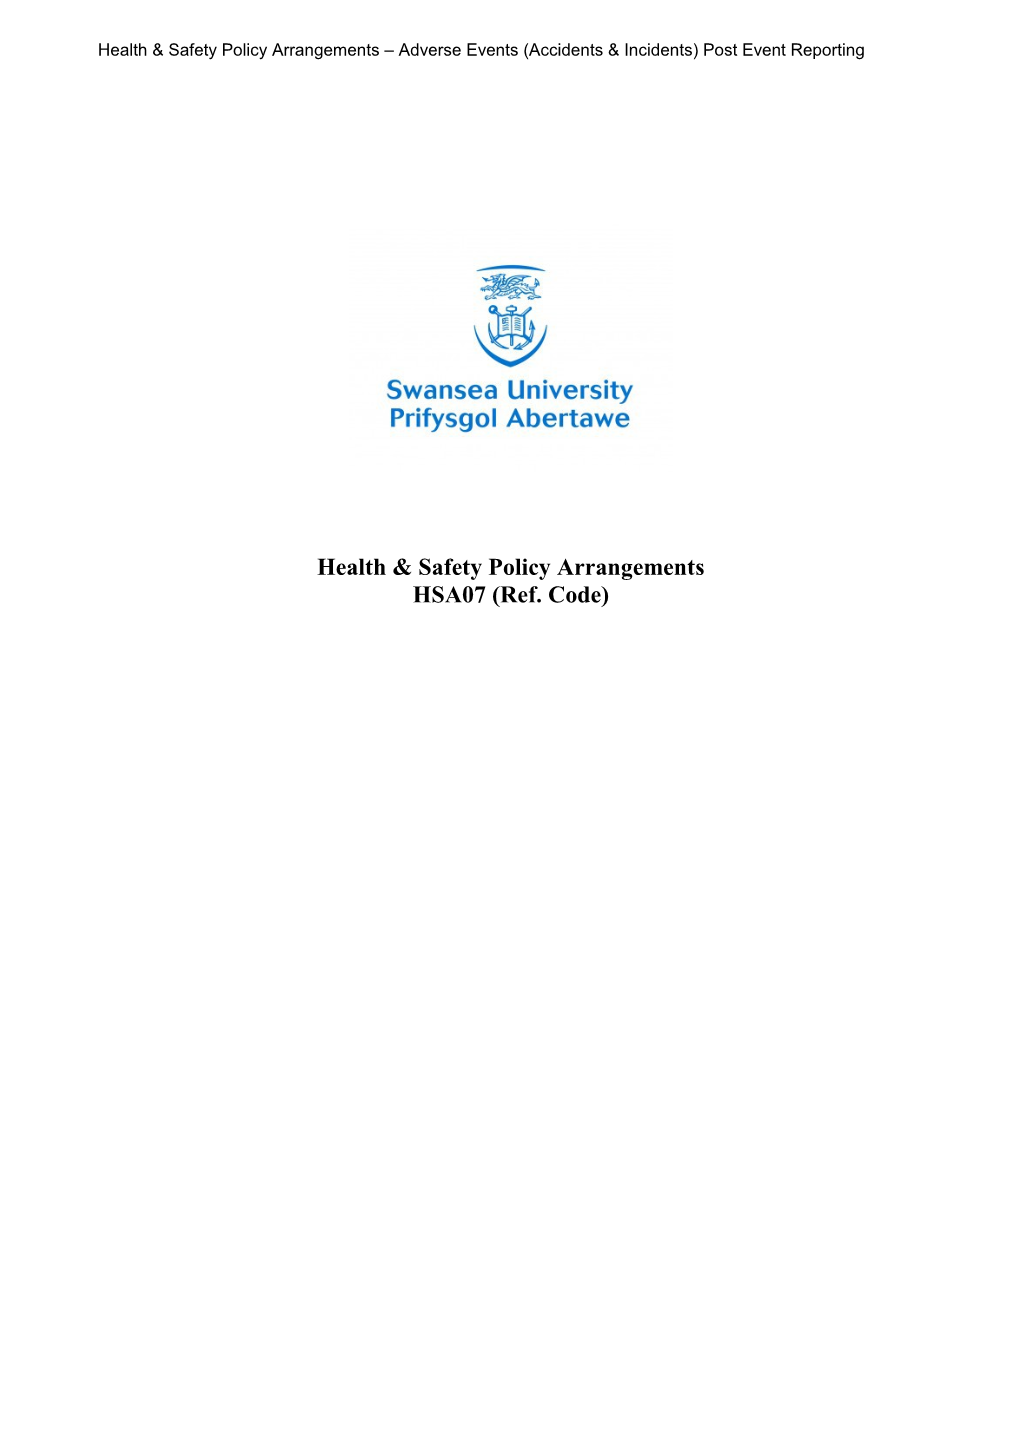 Health & Safety Policy Arrangements Adverse Events (Accidents & Incidents) Post Event Reporting